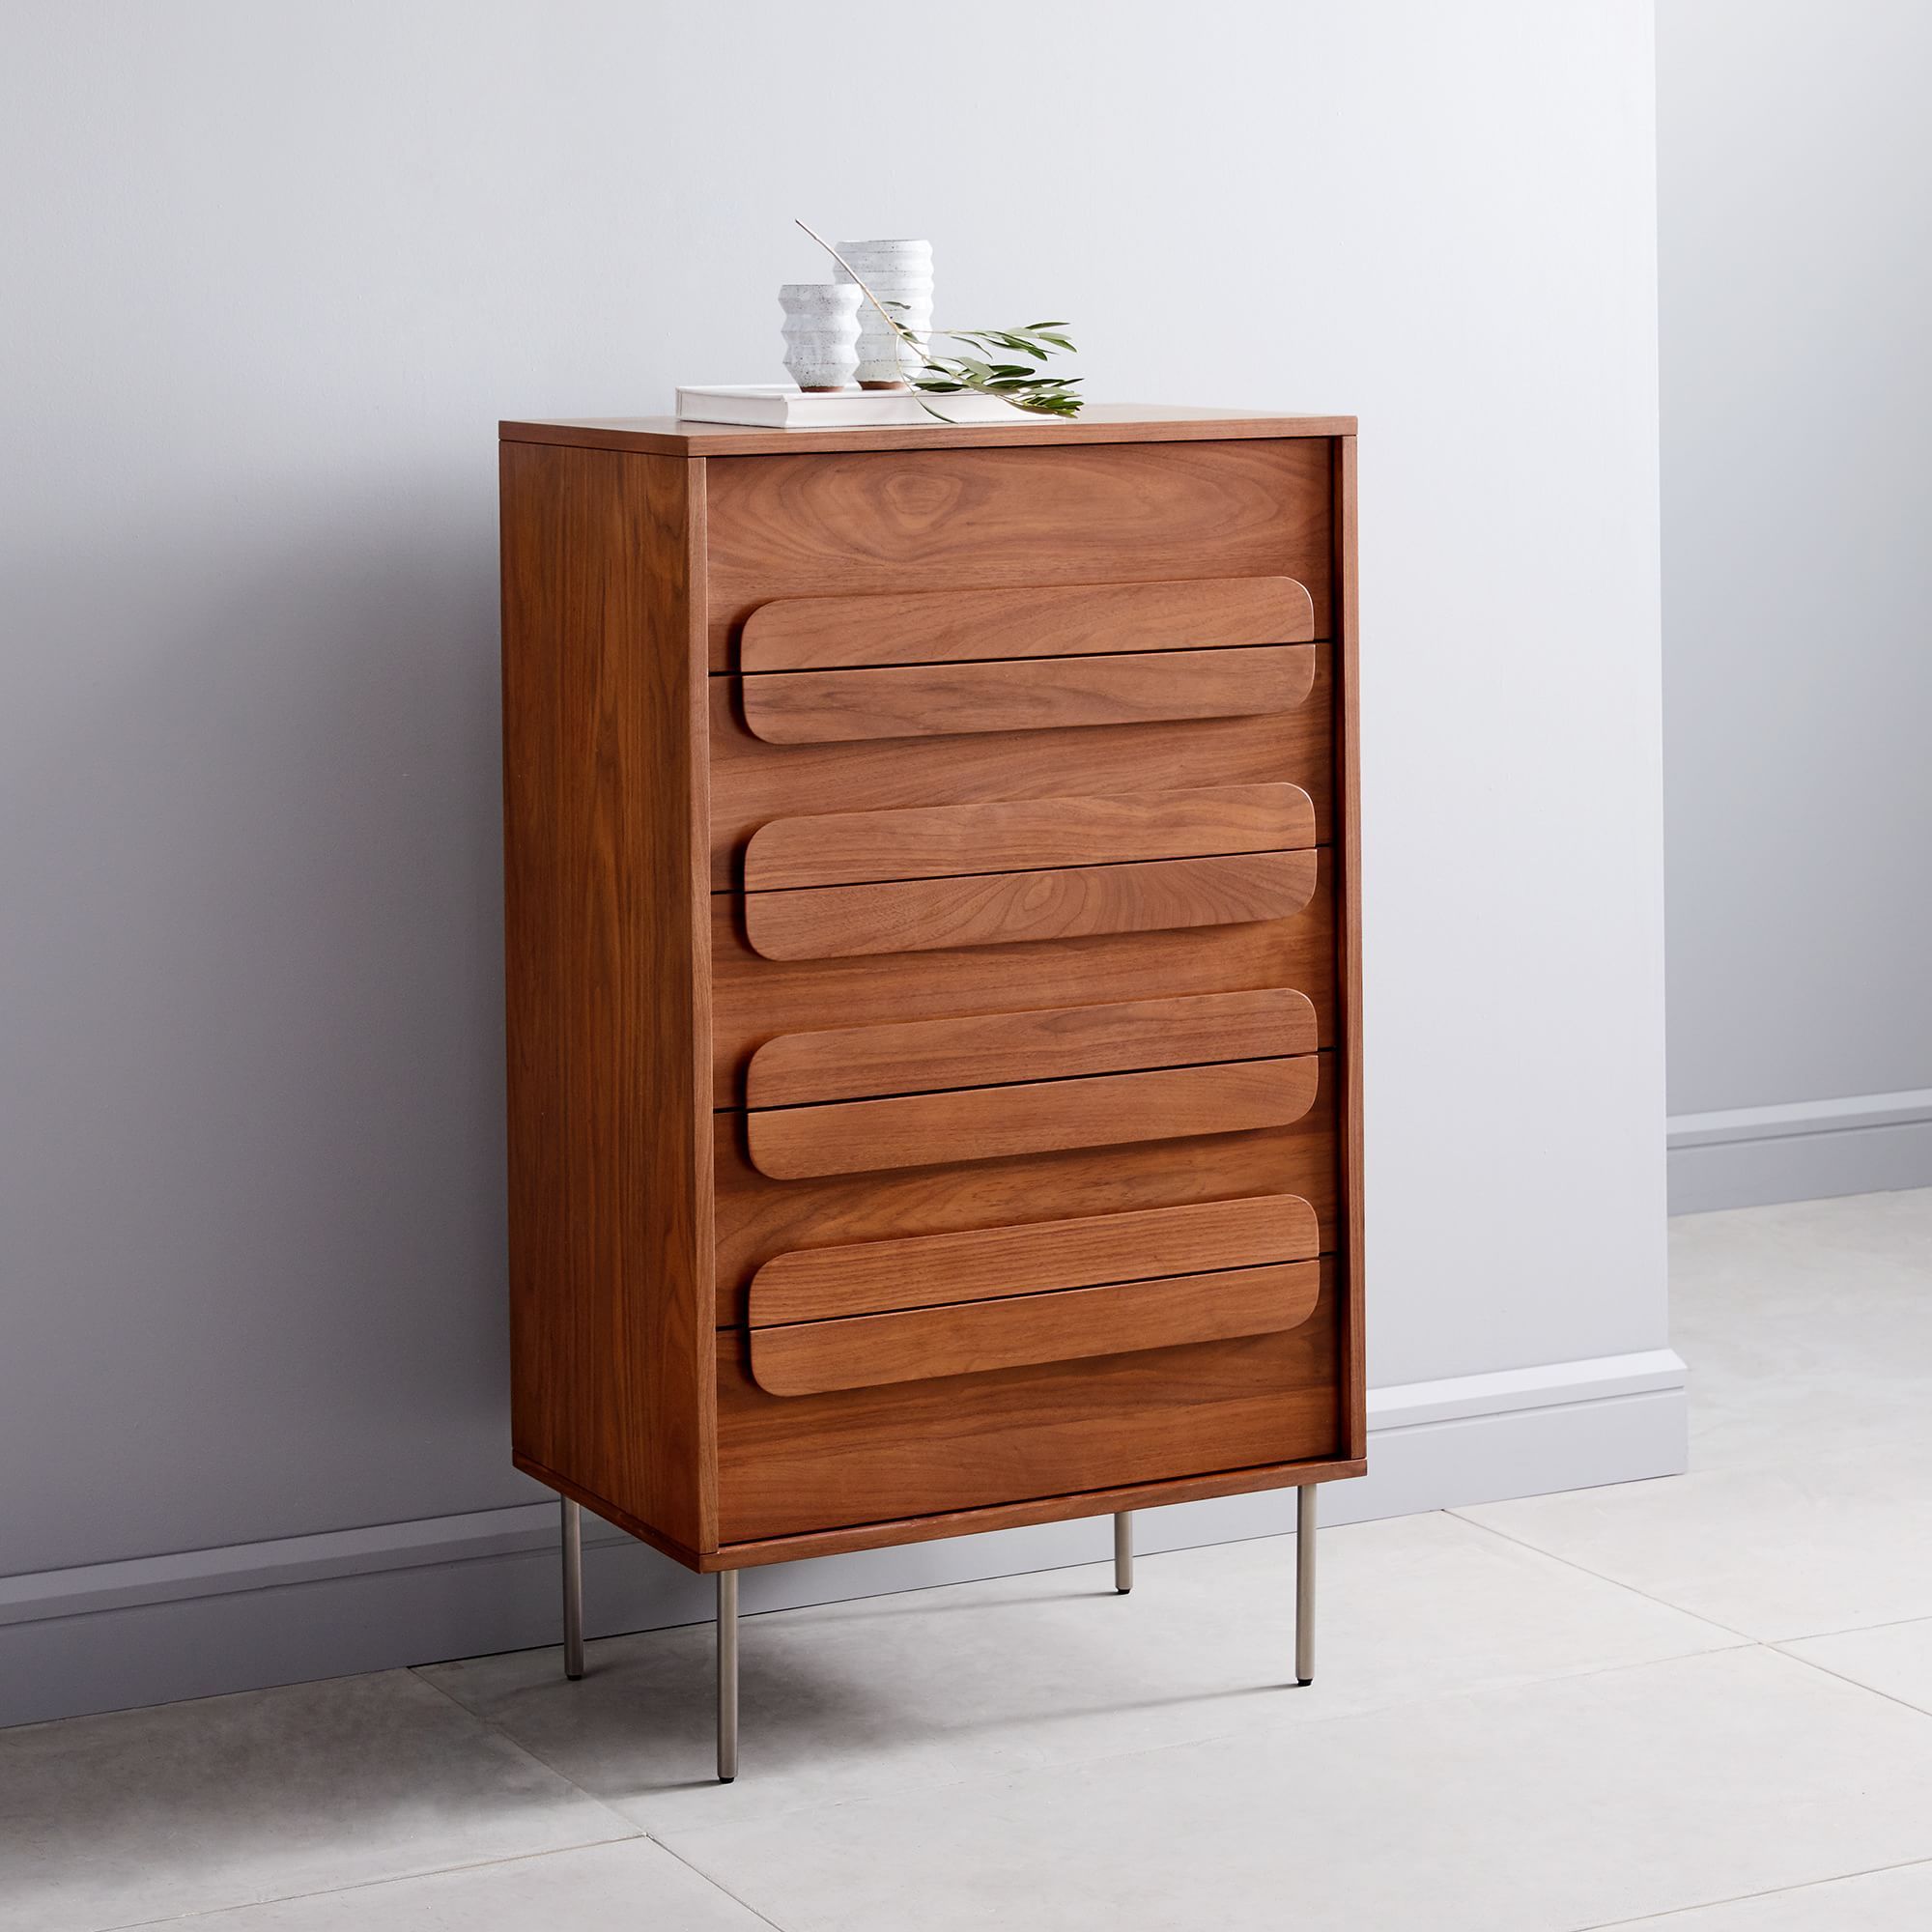 The 9 Best Small Dressers For Small Spaces & Bedrooms Intended For Cheap Wardrobes And Chest Of Drawers (View 15 of 15)